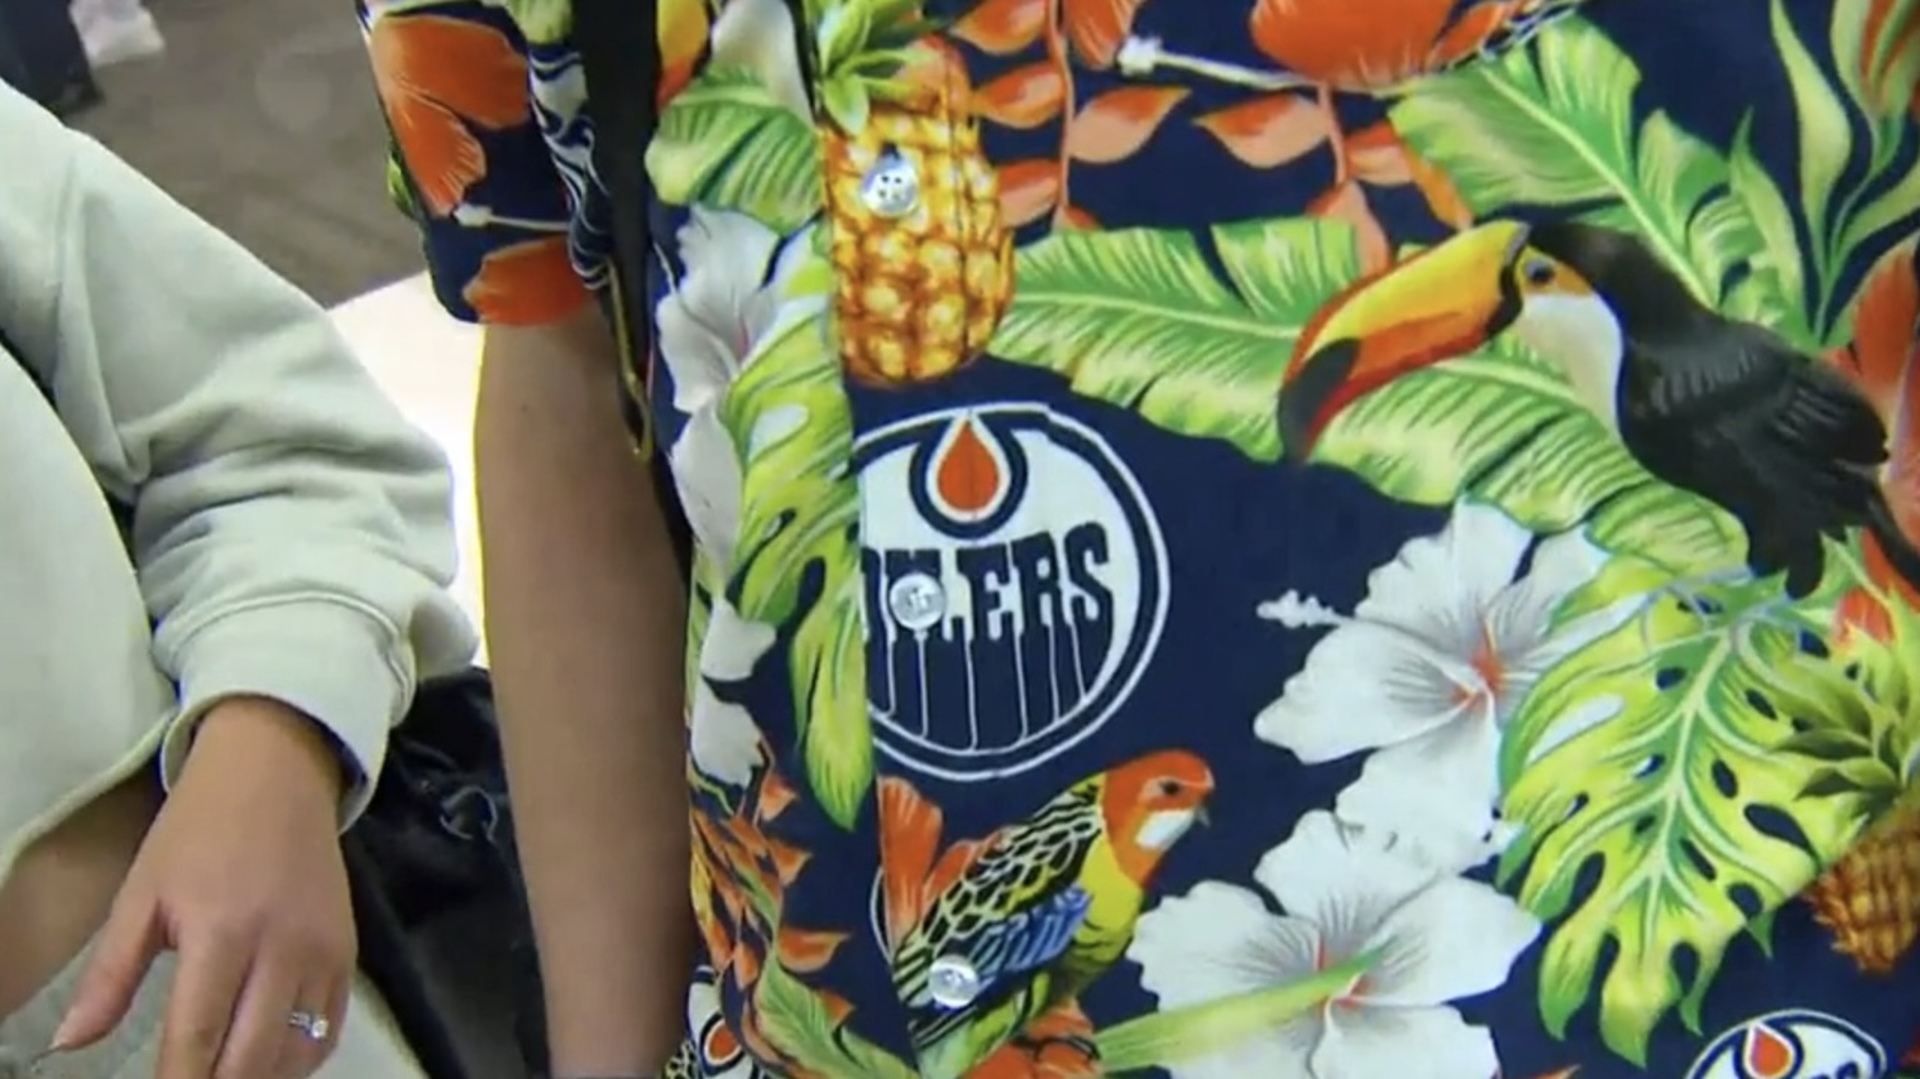 NHL Stanley Cup Final: Edmonton Oilers fans flock to Florida ahead of Game 7